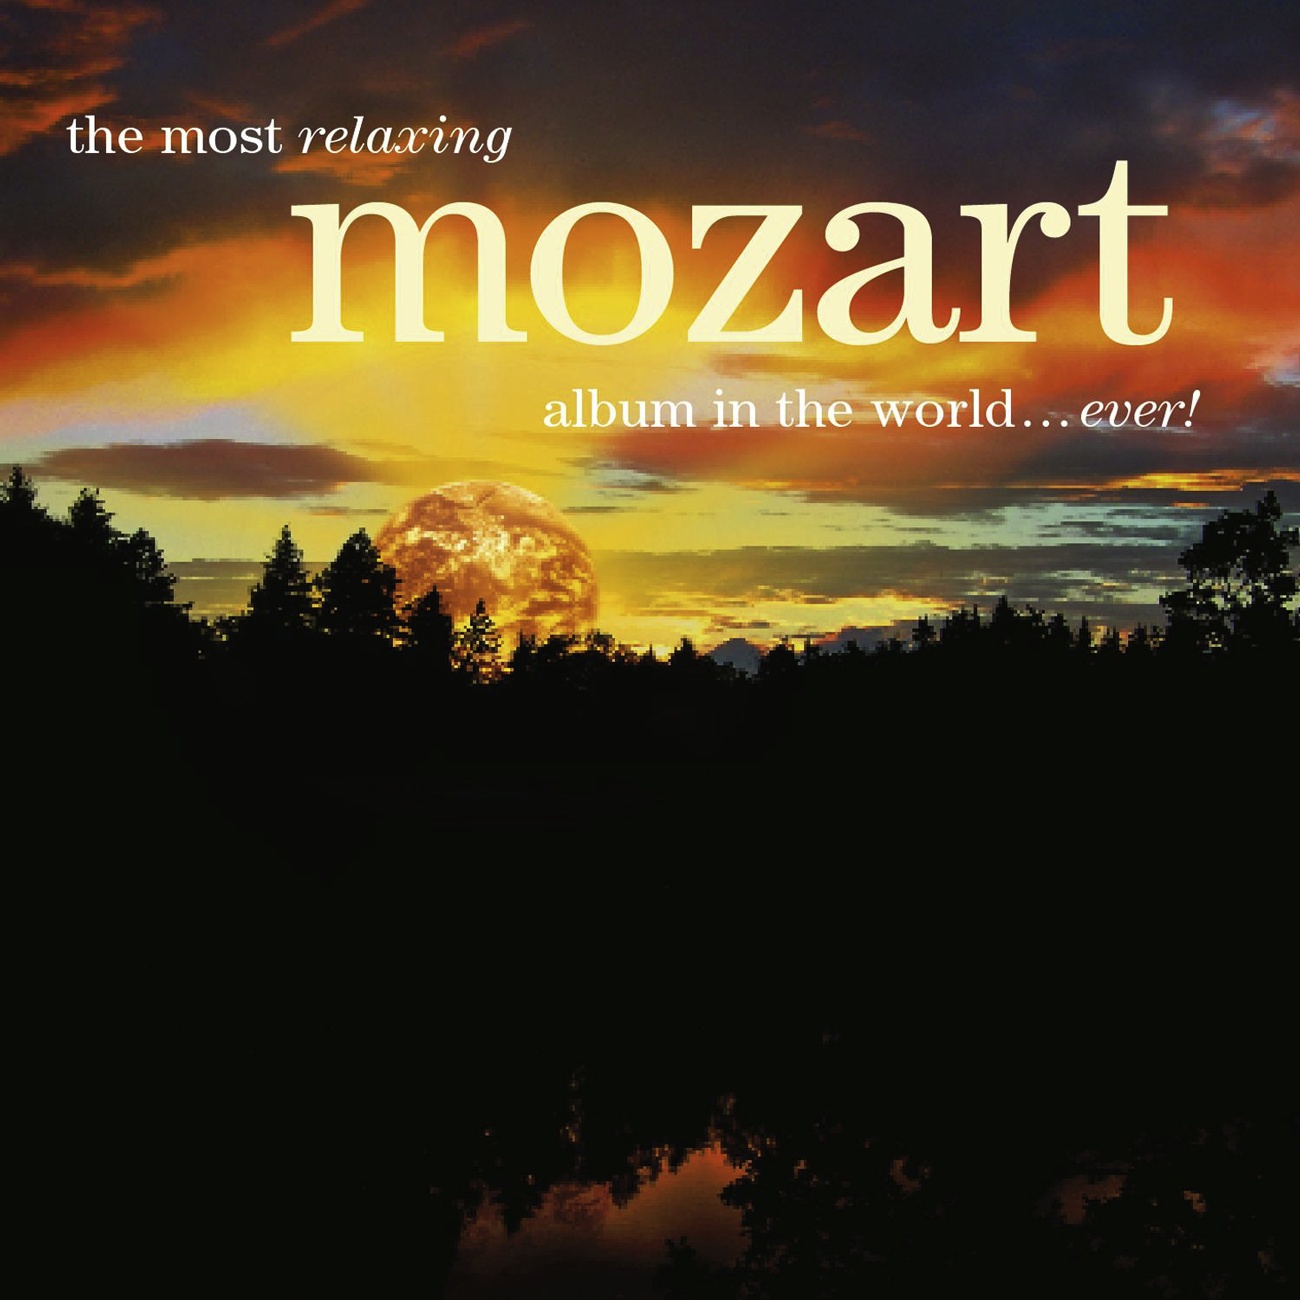 The Most Relaxing Mozart Album in the World... Ever!